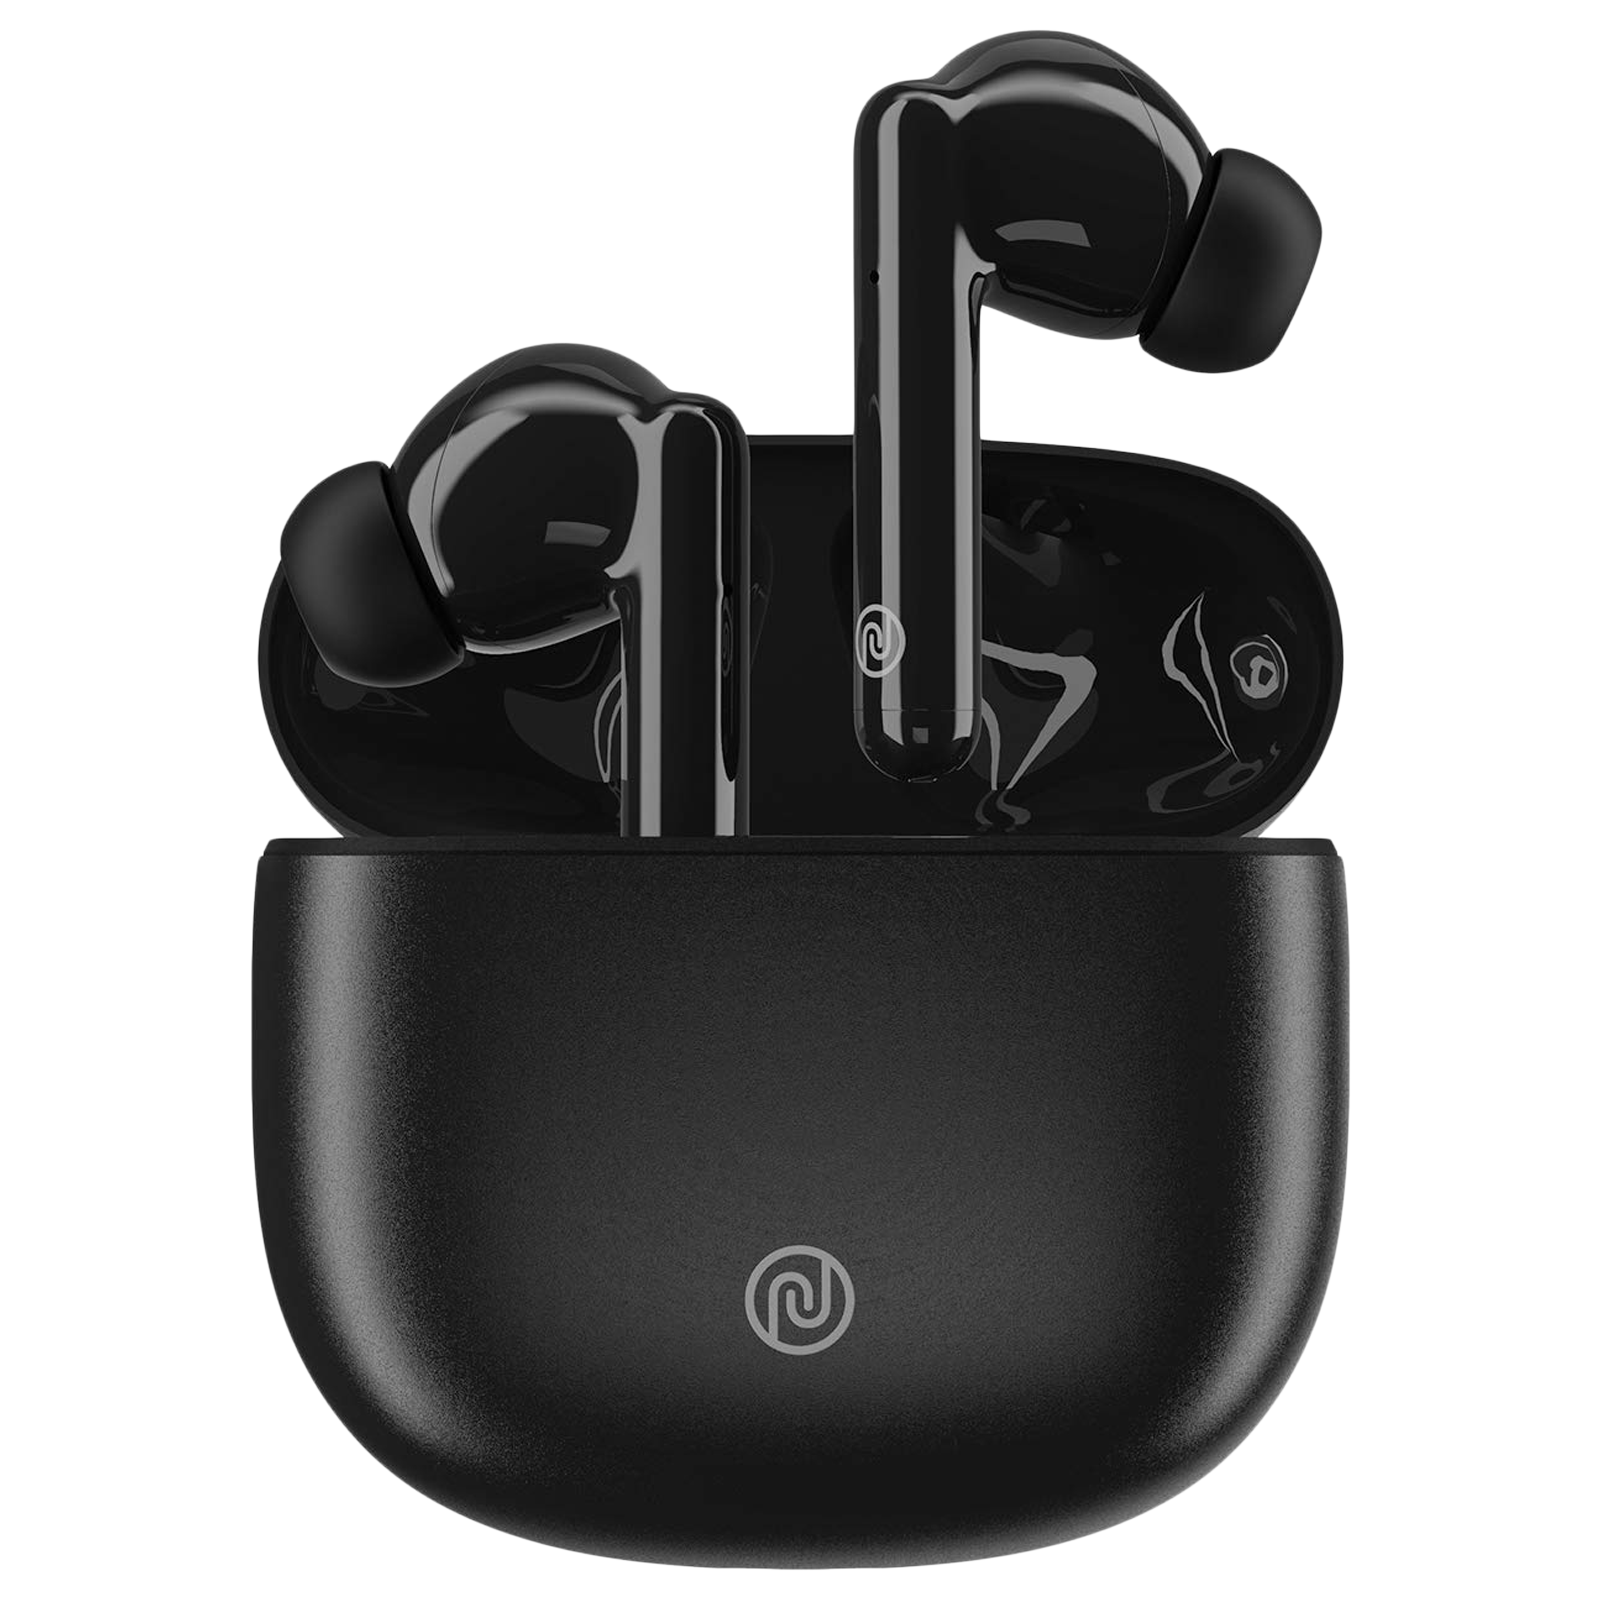 Noise Buds Play In-Ear Active Noise Cancellation Truly Wireless Earbuds With Mic (Bluetooth 5.0, IPX4 Water-Resistant, Black)_1